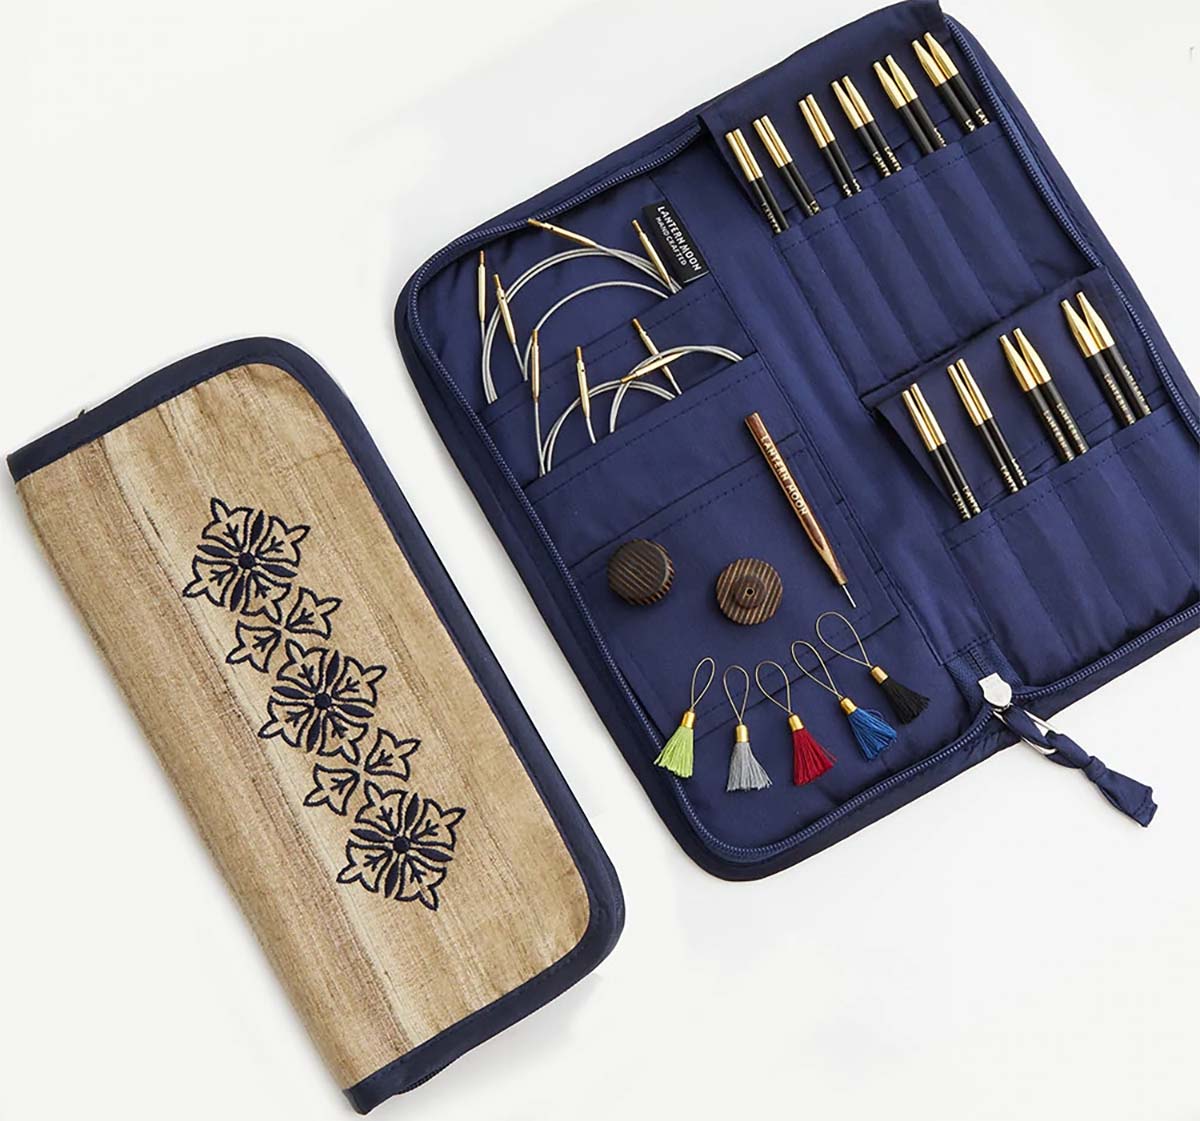  Lantern Moon Heritage 4-Inch 5-Pair Interchangeable Circular  Knitting Needle Set Handcrafted Ebony Sizes US 3, 5, 6, 7, 8, Silk Case, 2  Cords, 4 End Caps, 5 Markers Bundle with 1 Artsiga Crafts Bag